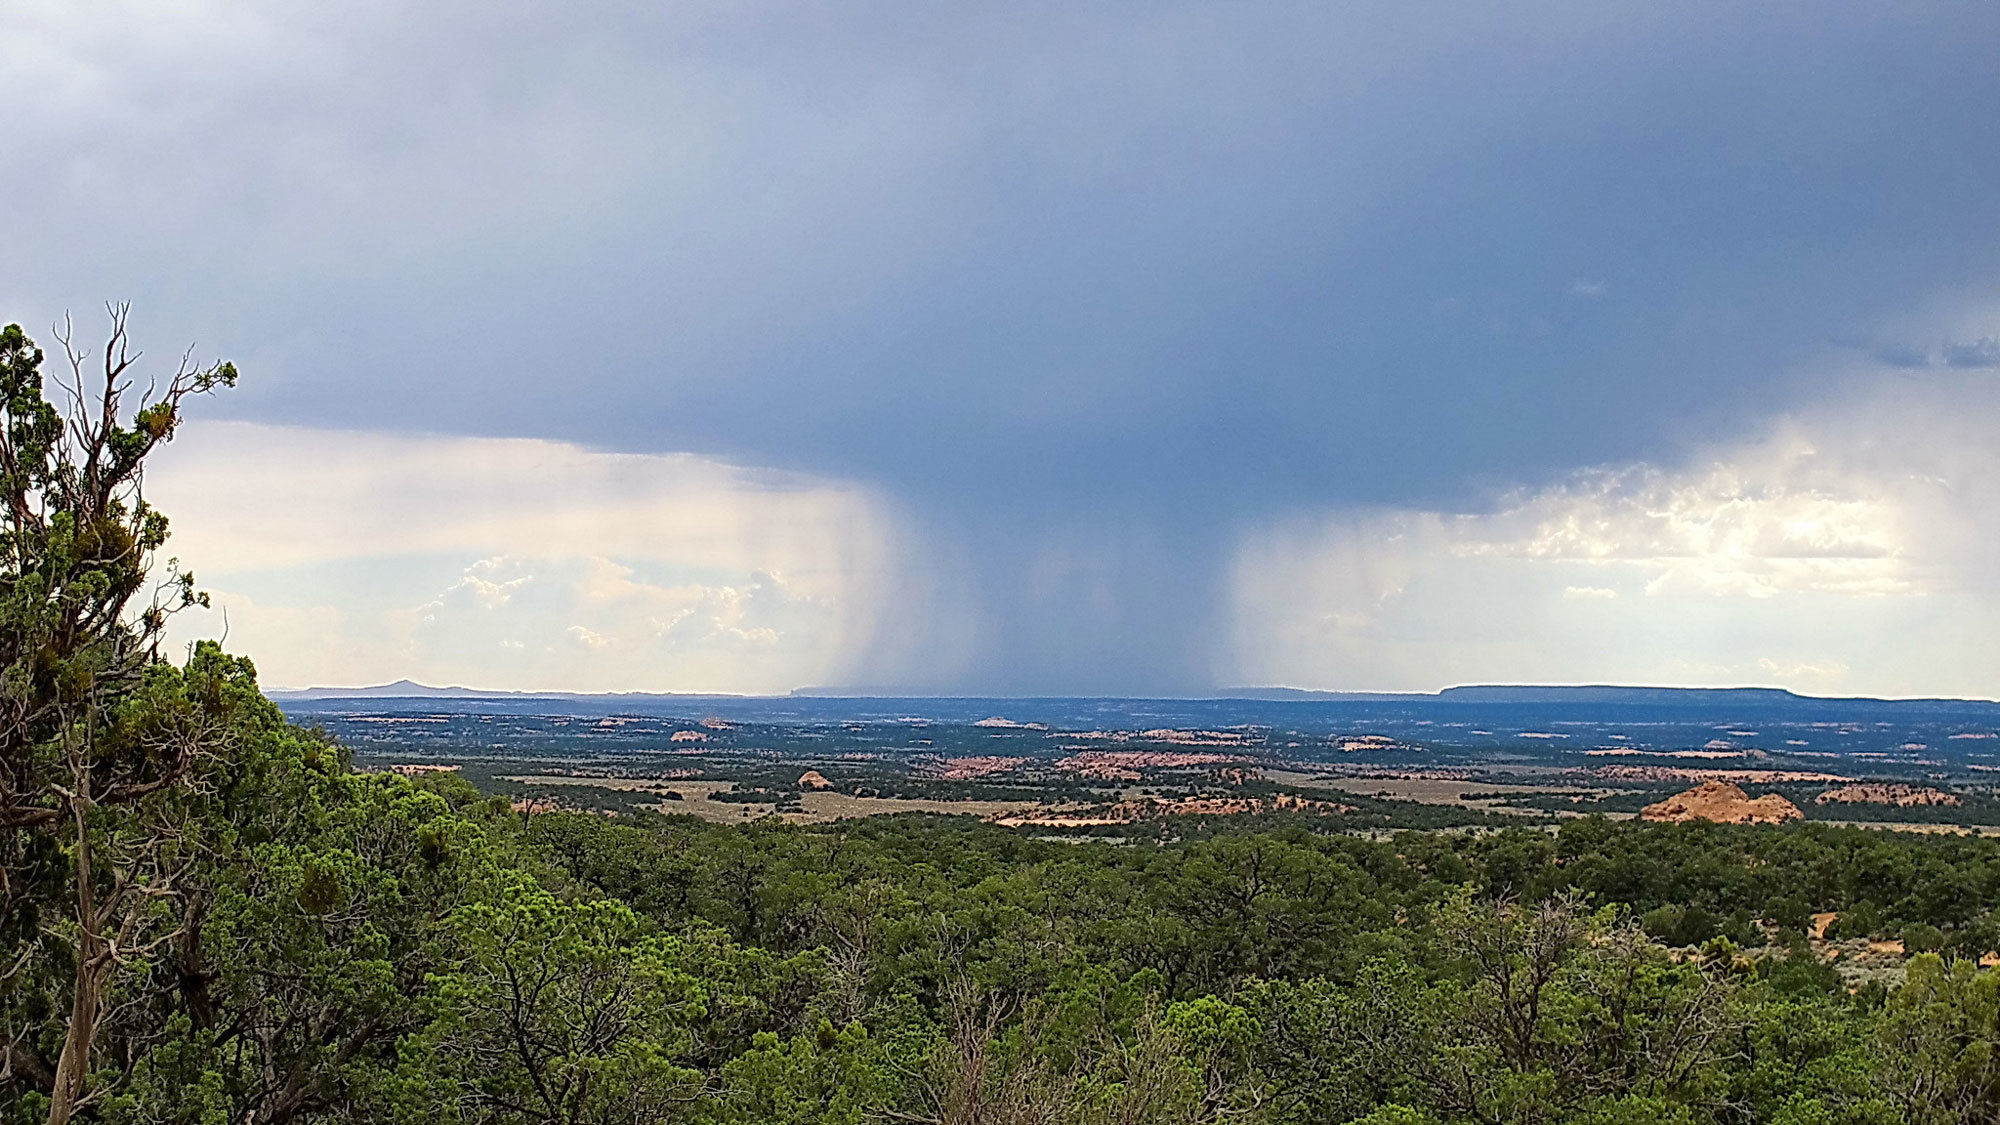 Monsoon Rains Have Become More Intense in the U.S. Southwest